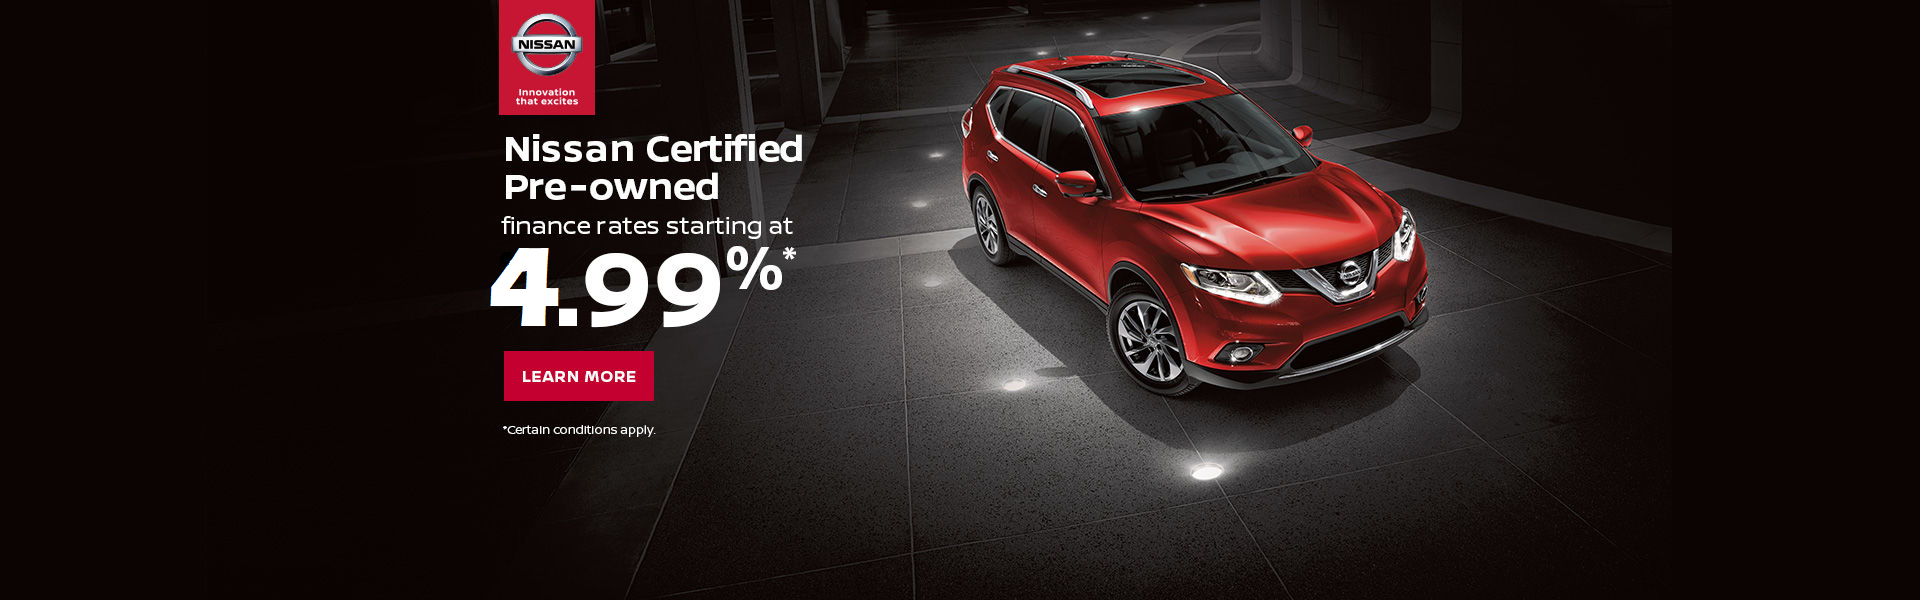 Nissan Certified Pre-owned